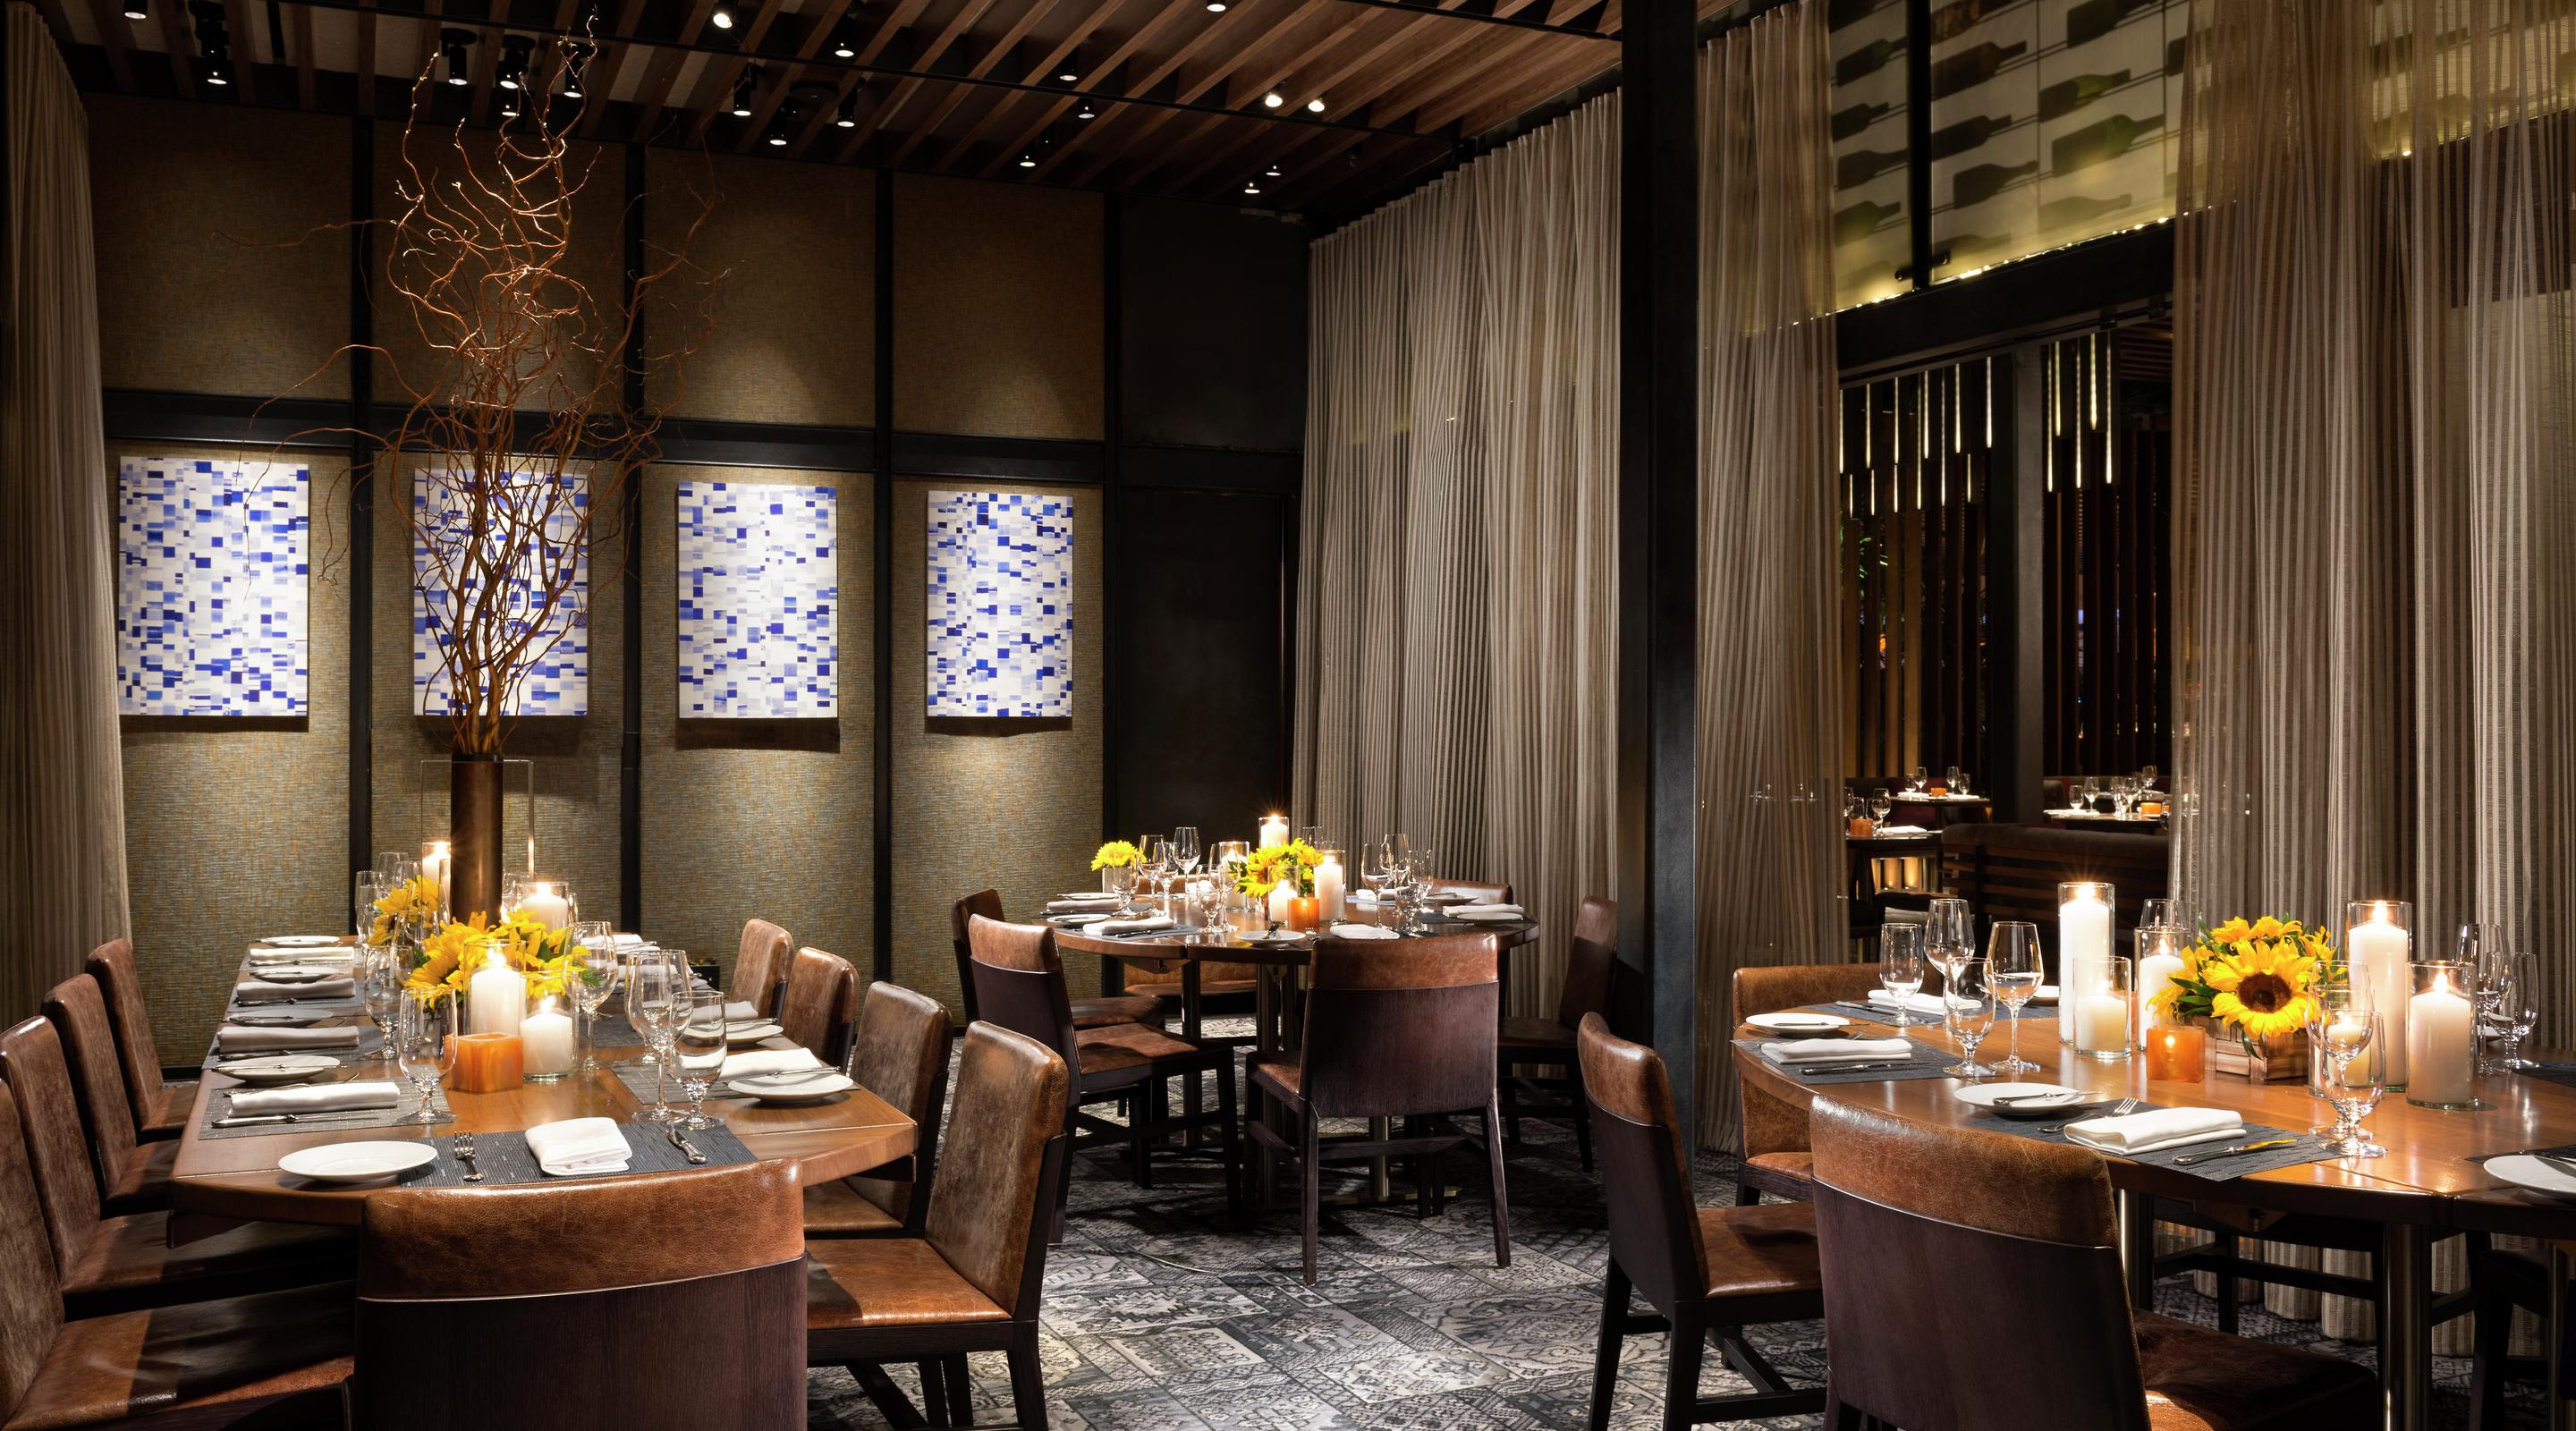 New York chef Tom Colicchio brings his passion for cooking with fire to the Las Vegas Strip with Tom Colicchio's Heritage Steak at The Mirage